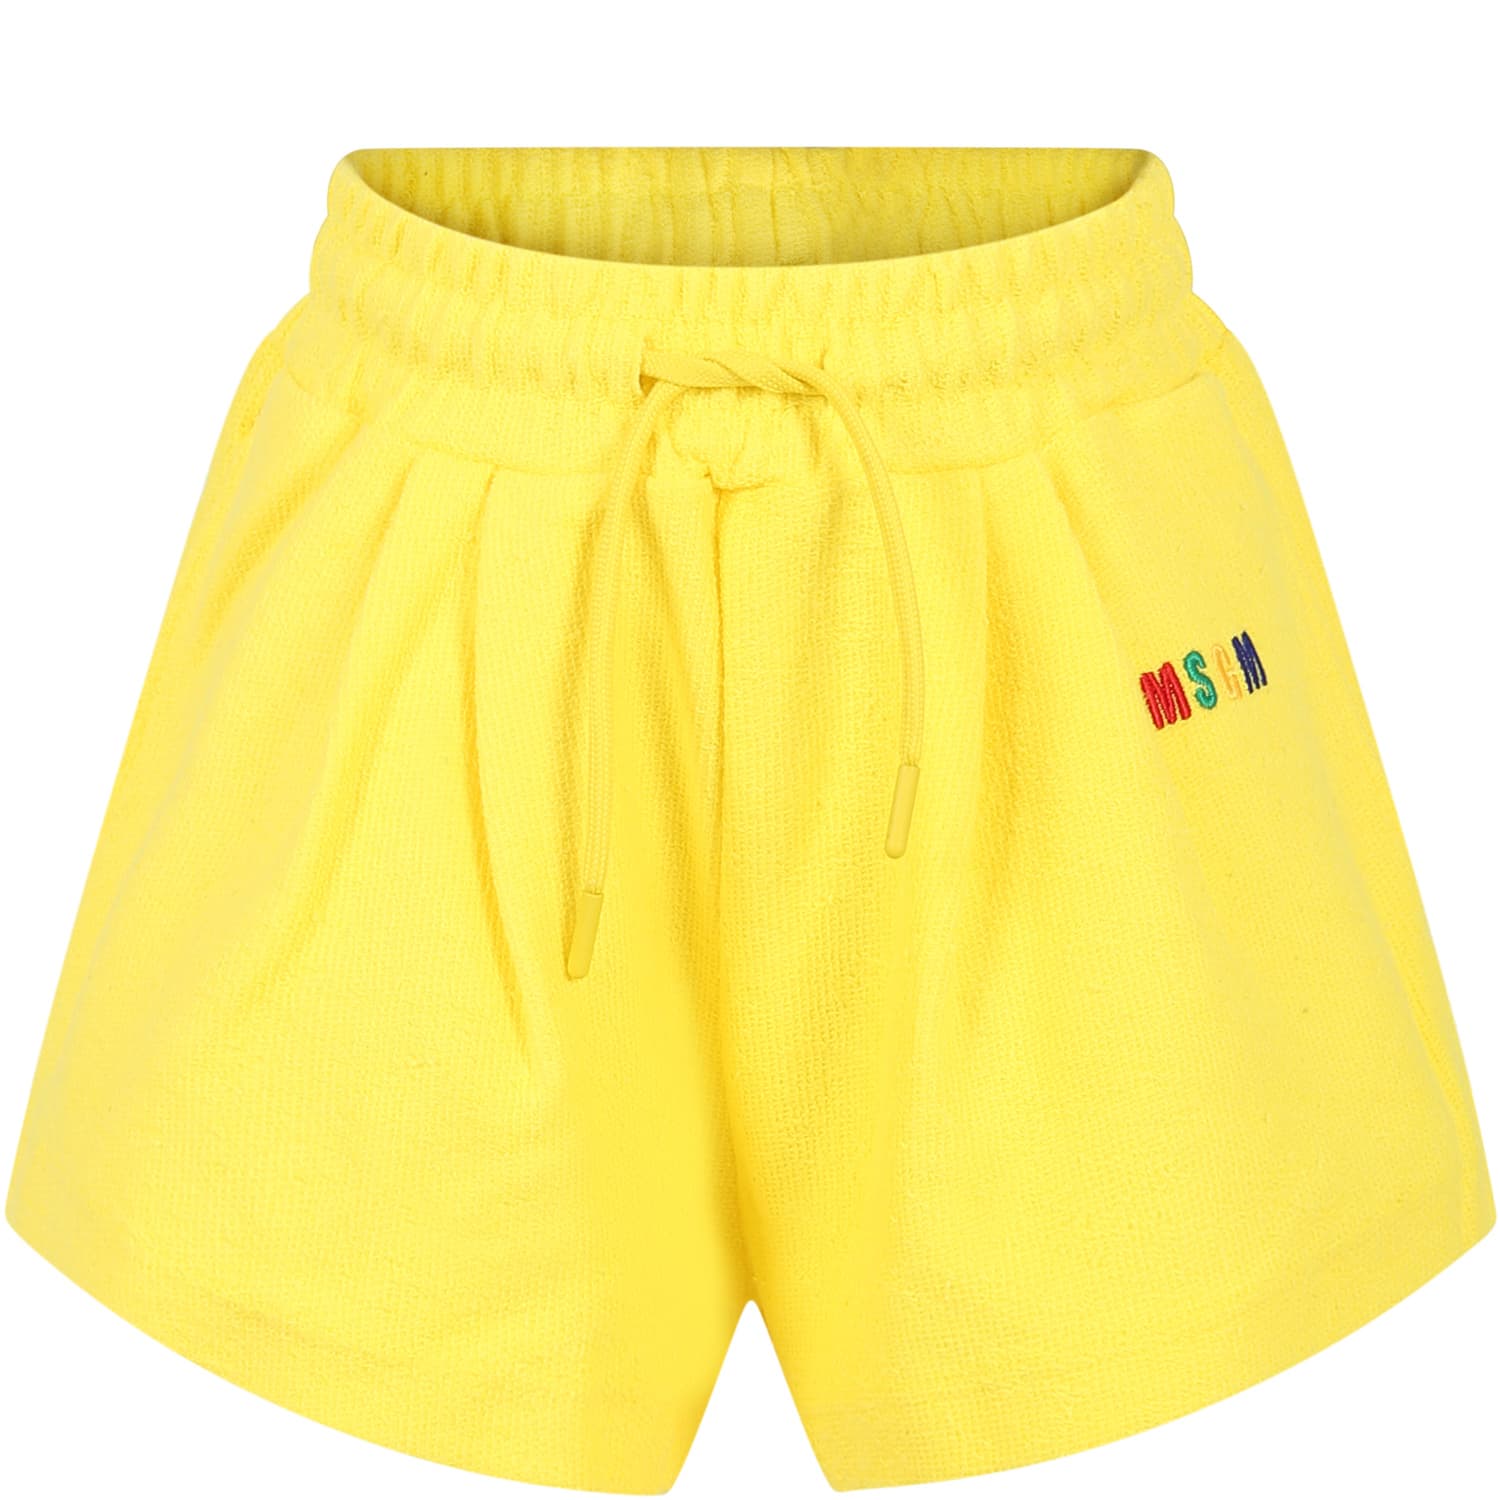 Msgm Kids' Casual Yellow Shorts For Girl